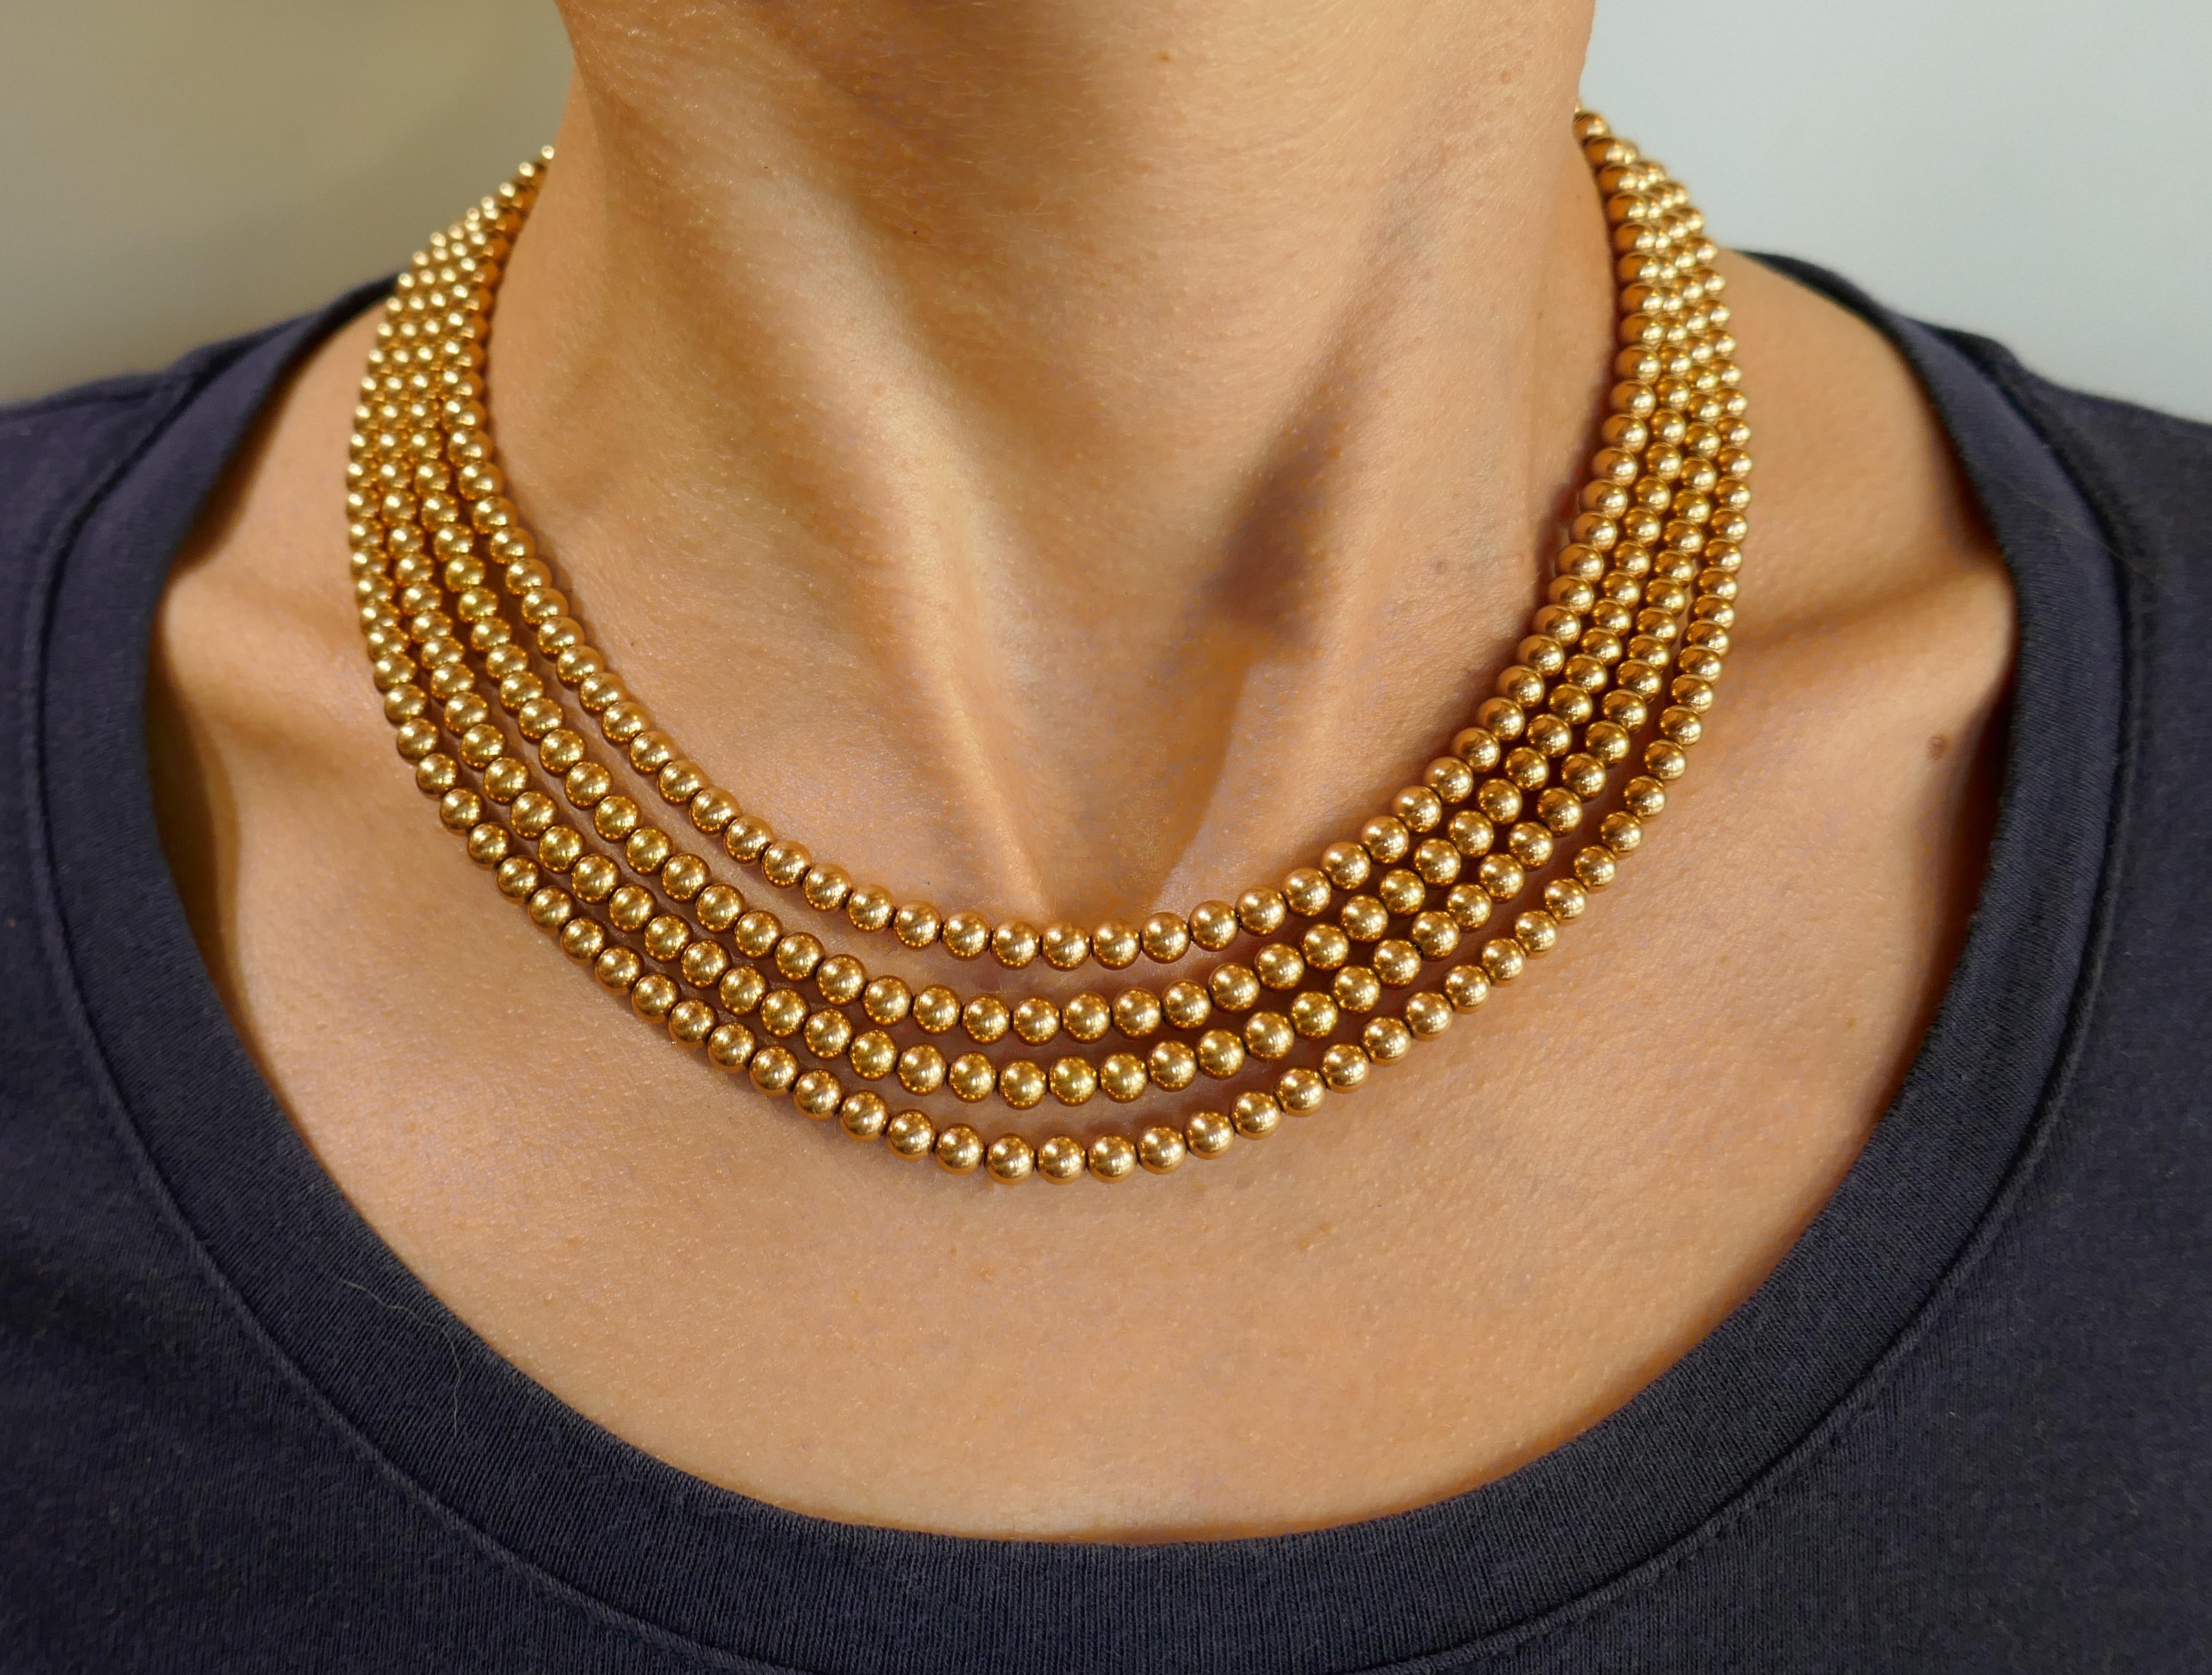 Lovely multi-strand gold bead necklace. Features four strands of yellow gold beads. Elegant, feminine and wearable, the necklace is a great addition to your jewelry collection.
The shortest strand is 15 inches (38 centimeters) long, the longest